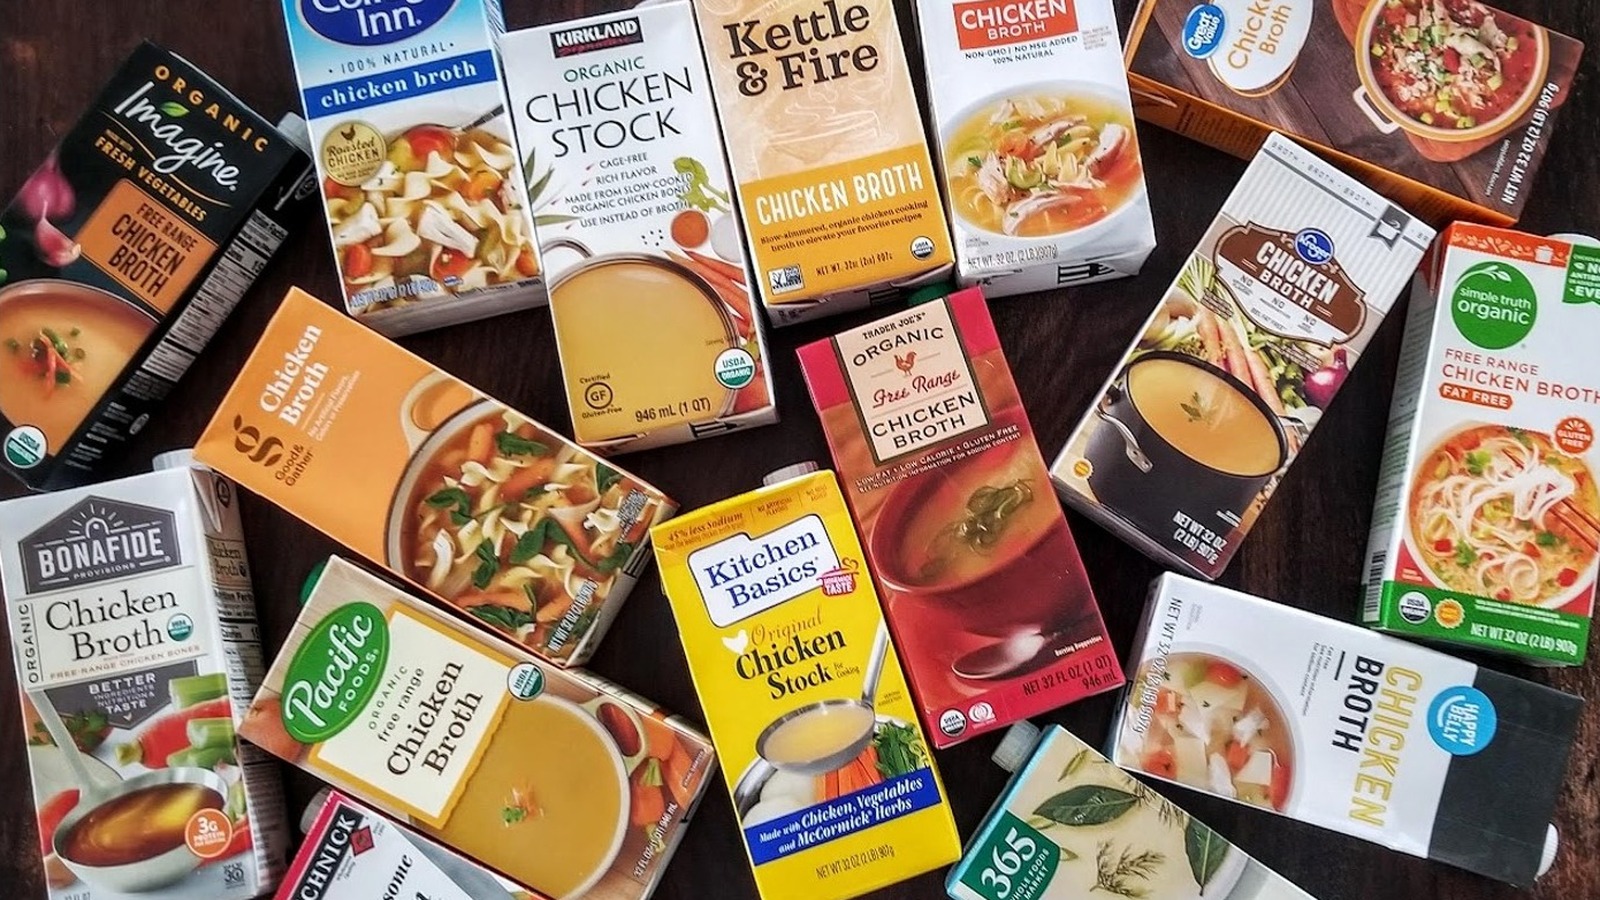 https://www.tastingtable.com/img/gallery/16-boxed-chicken-broth-brands-ranked-worst-to-best/l-intro-1679918786.jpg